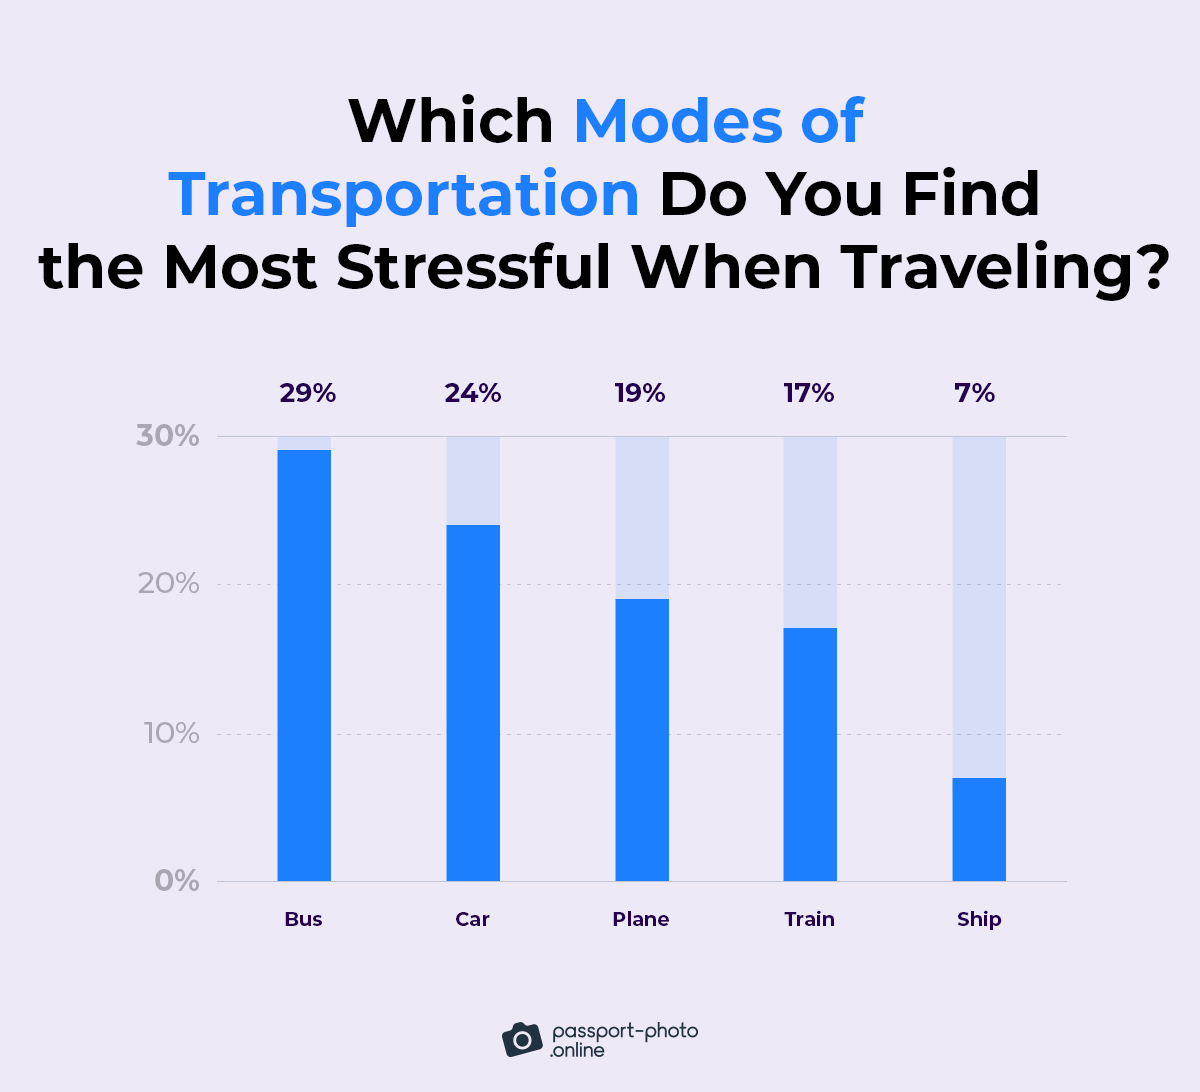 people usually find busses (29%) the most stressful mode of transportation